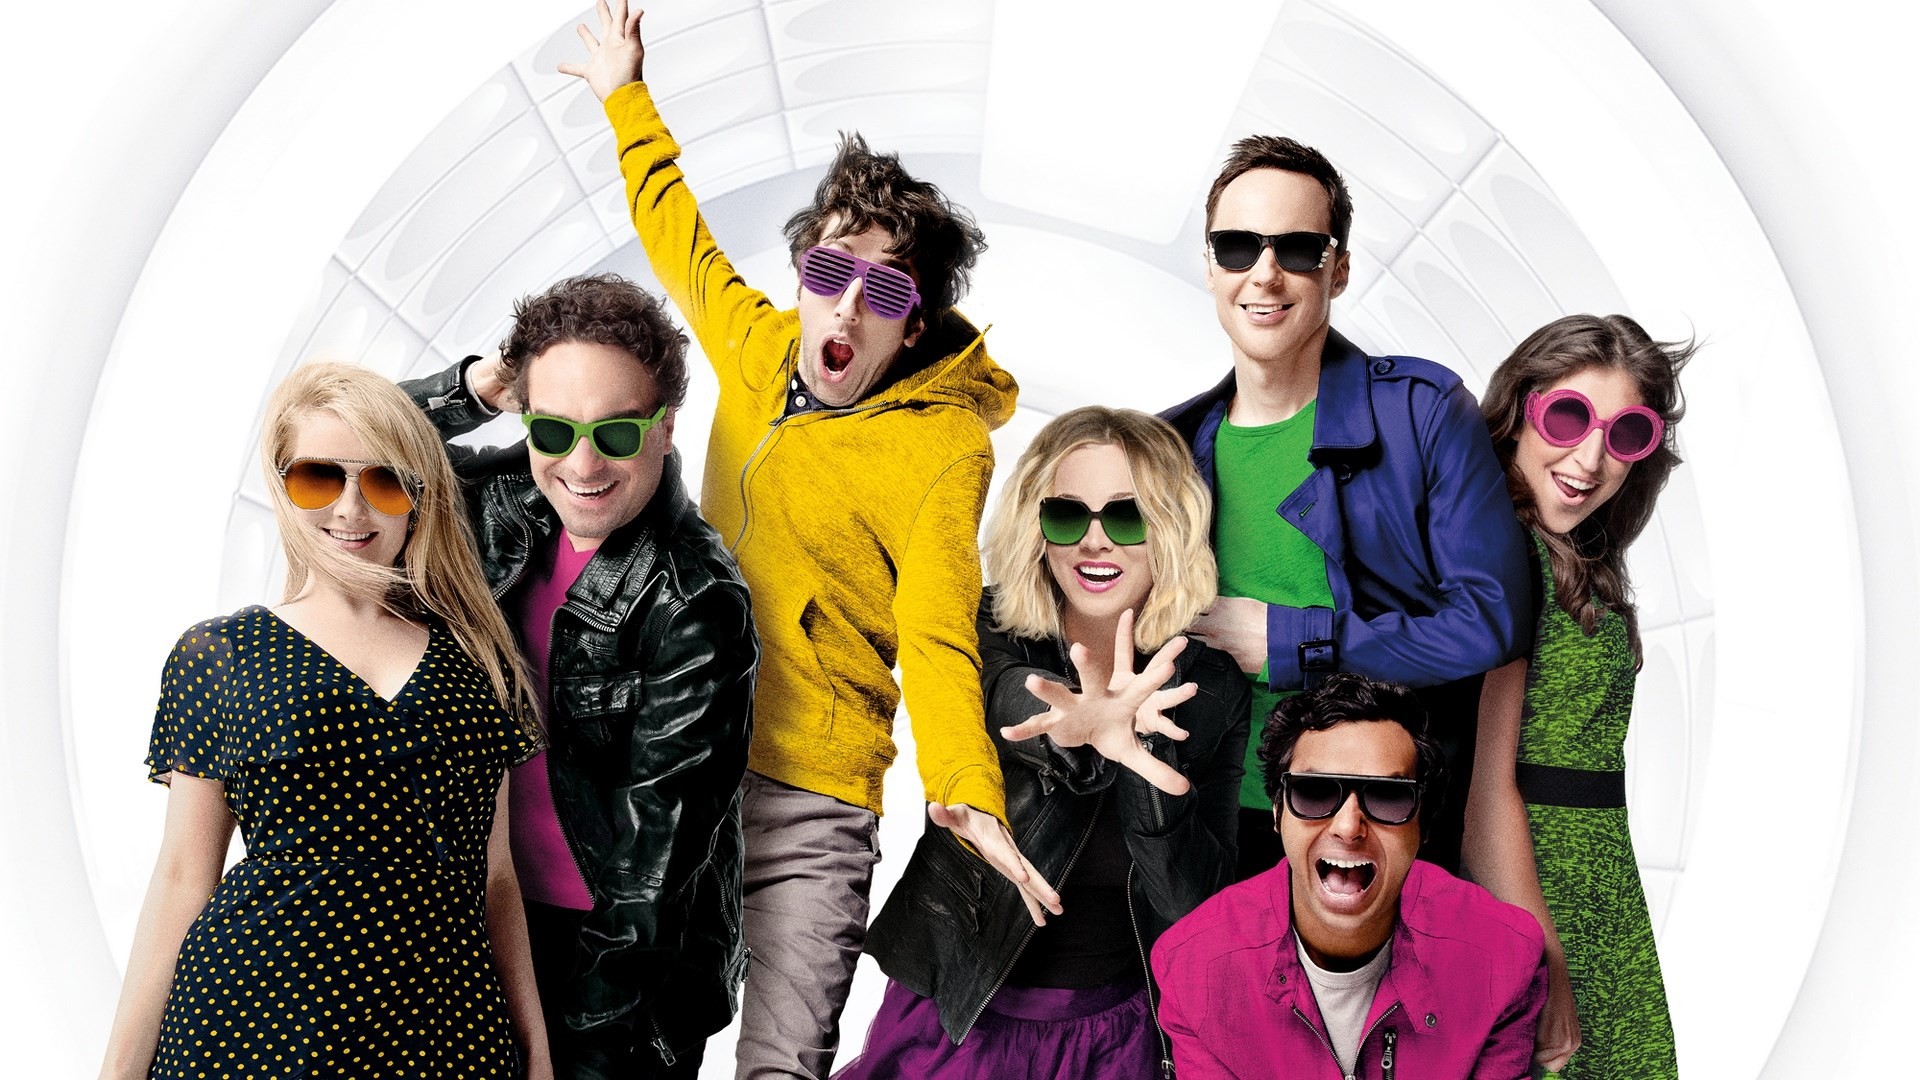 1920x1080 free desktop pictures the big bang theory